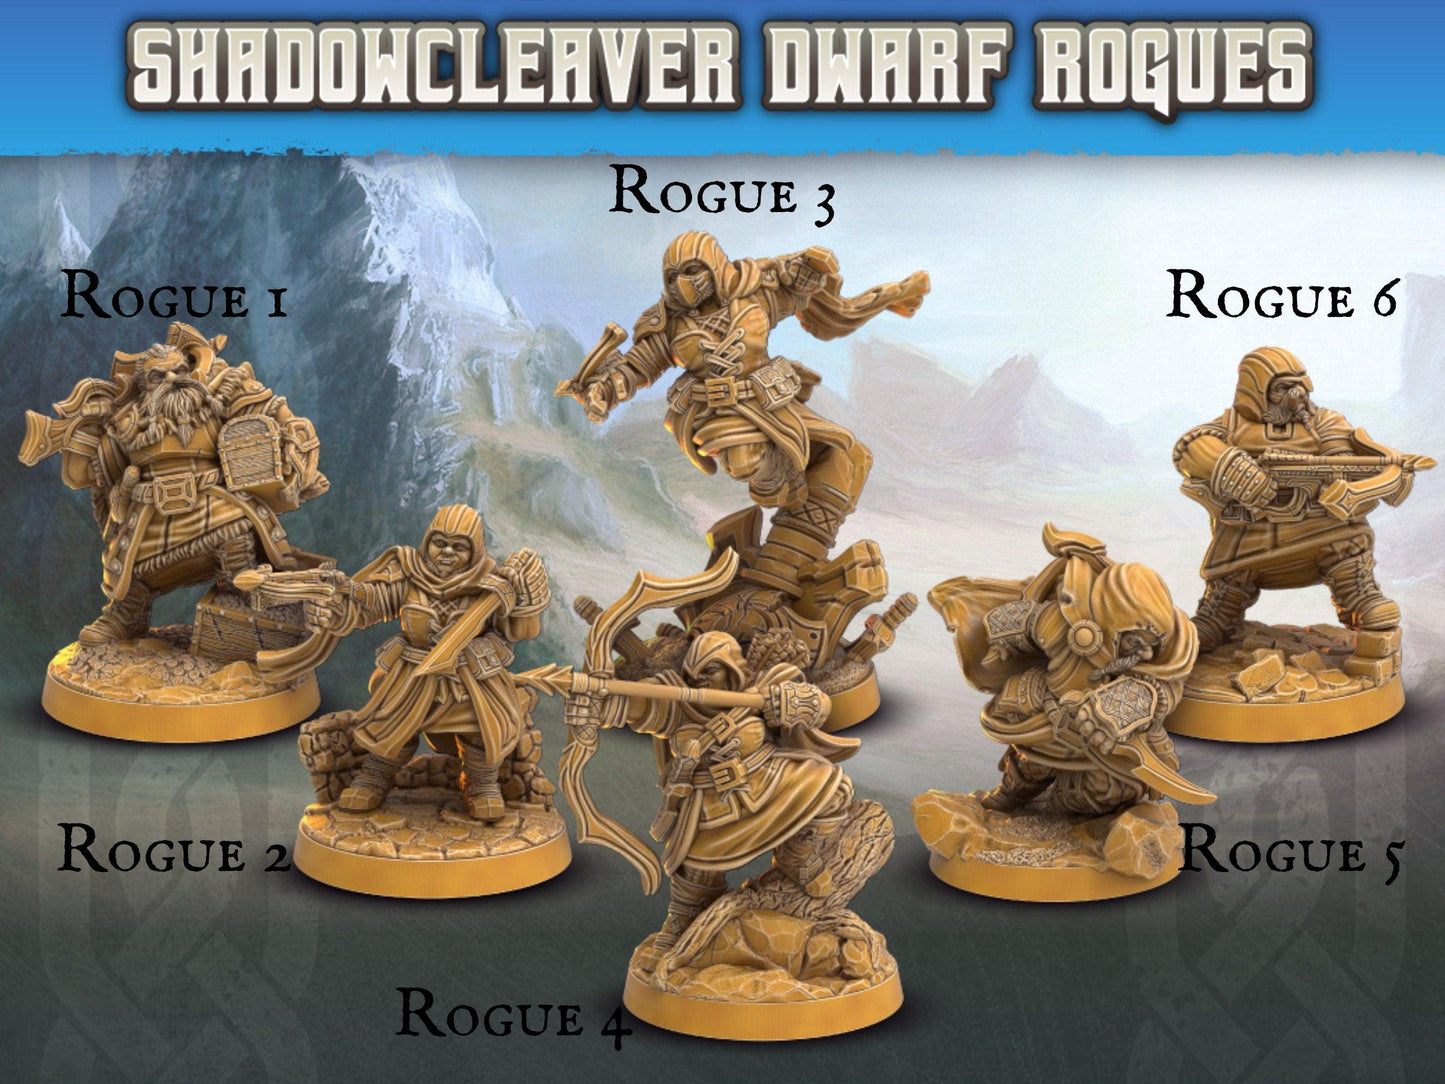 Dwarf Rogue miniatures | Dragon's Forge | 28mm Scale | DnD Miniature | Dungeons and Dragons | Dungeon Master Gift - Plague Miniatures shop for DnD Miniatures